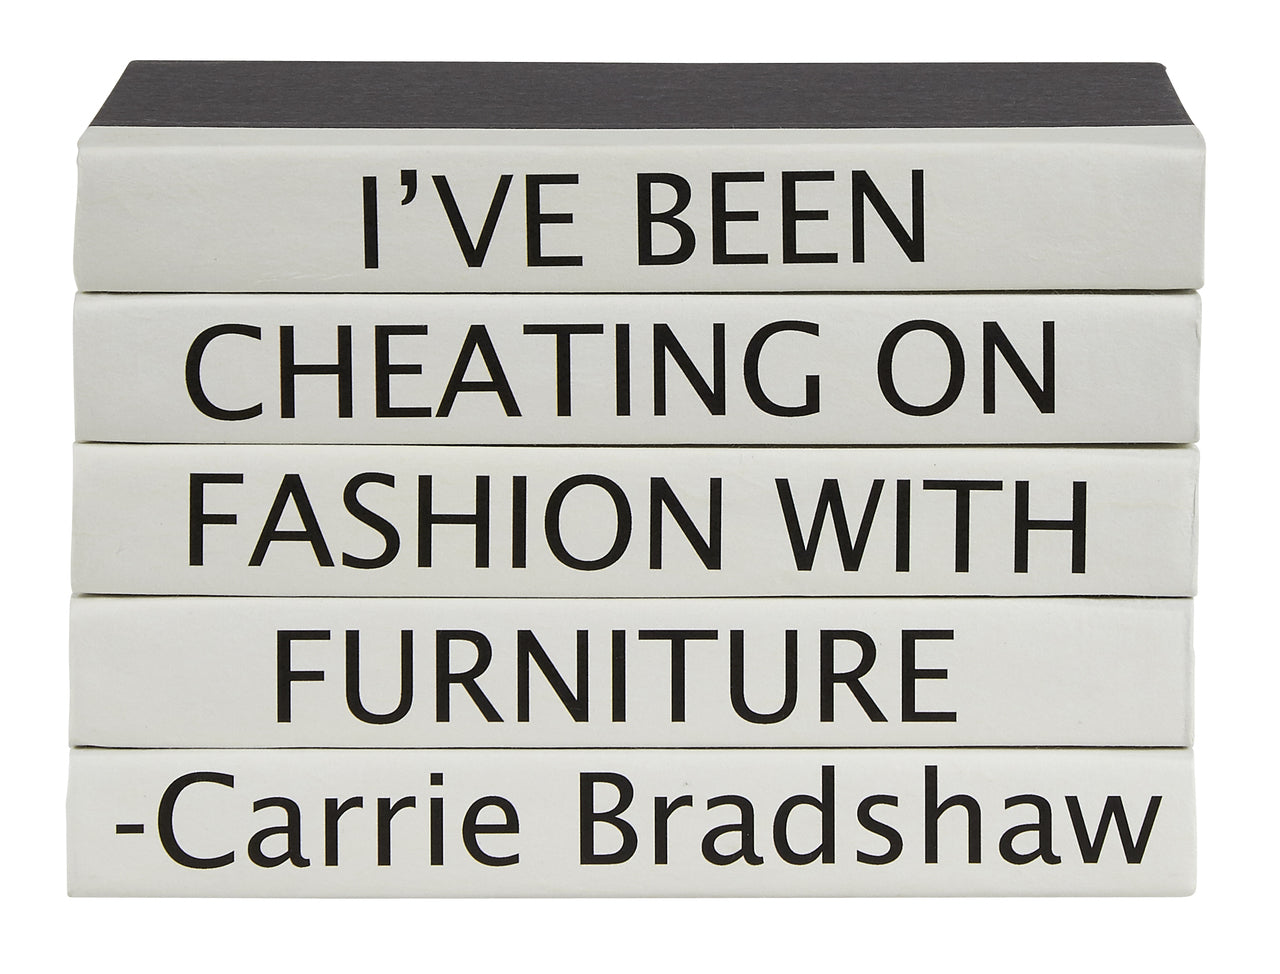 5 vol decorative quote stack -  "I've been cheating" book